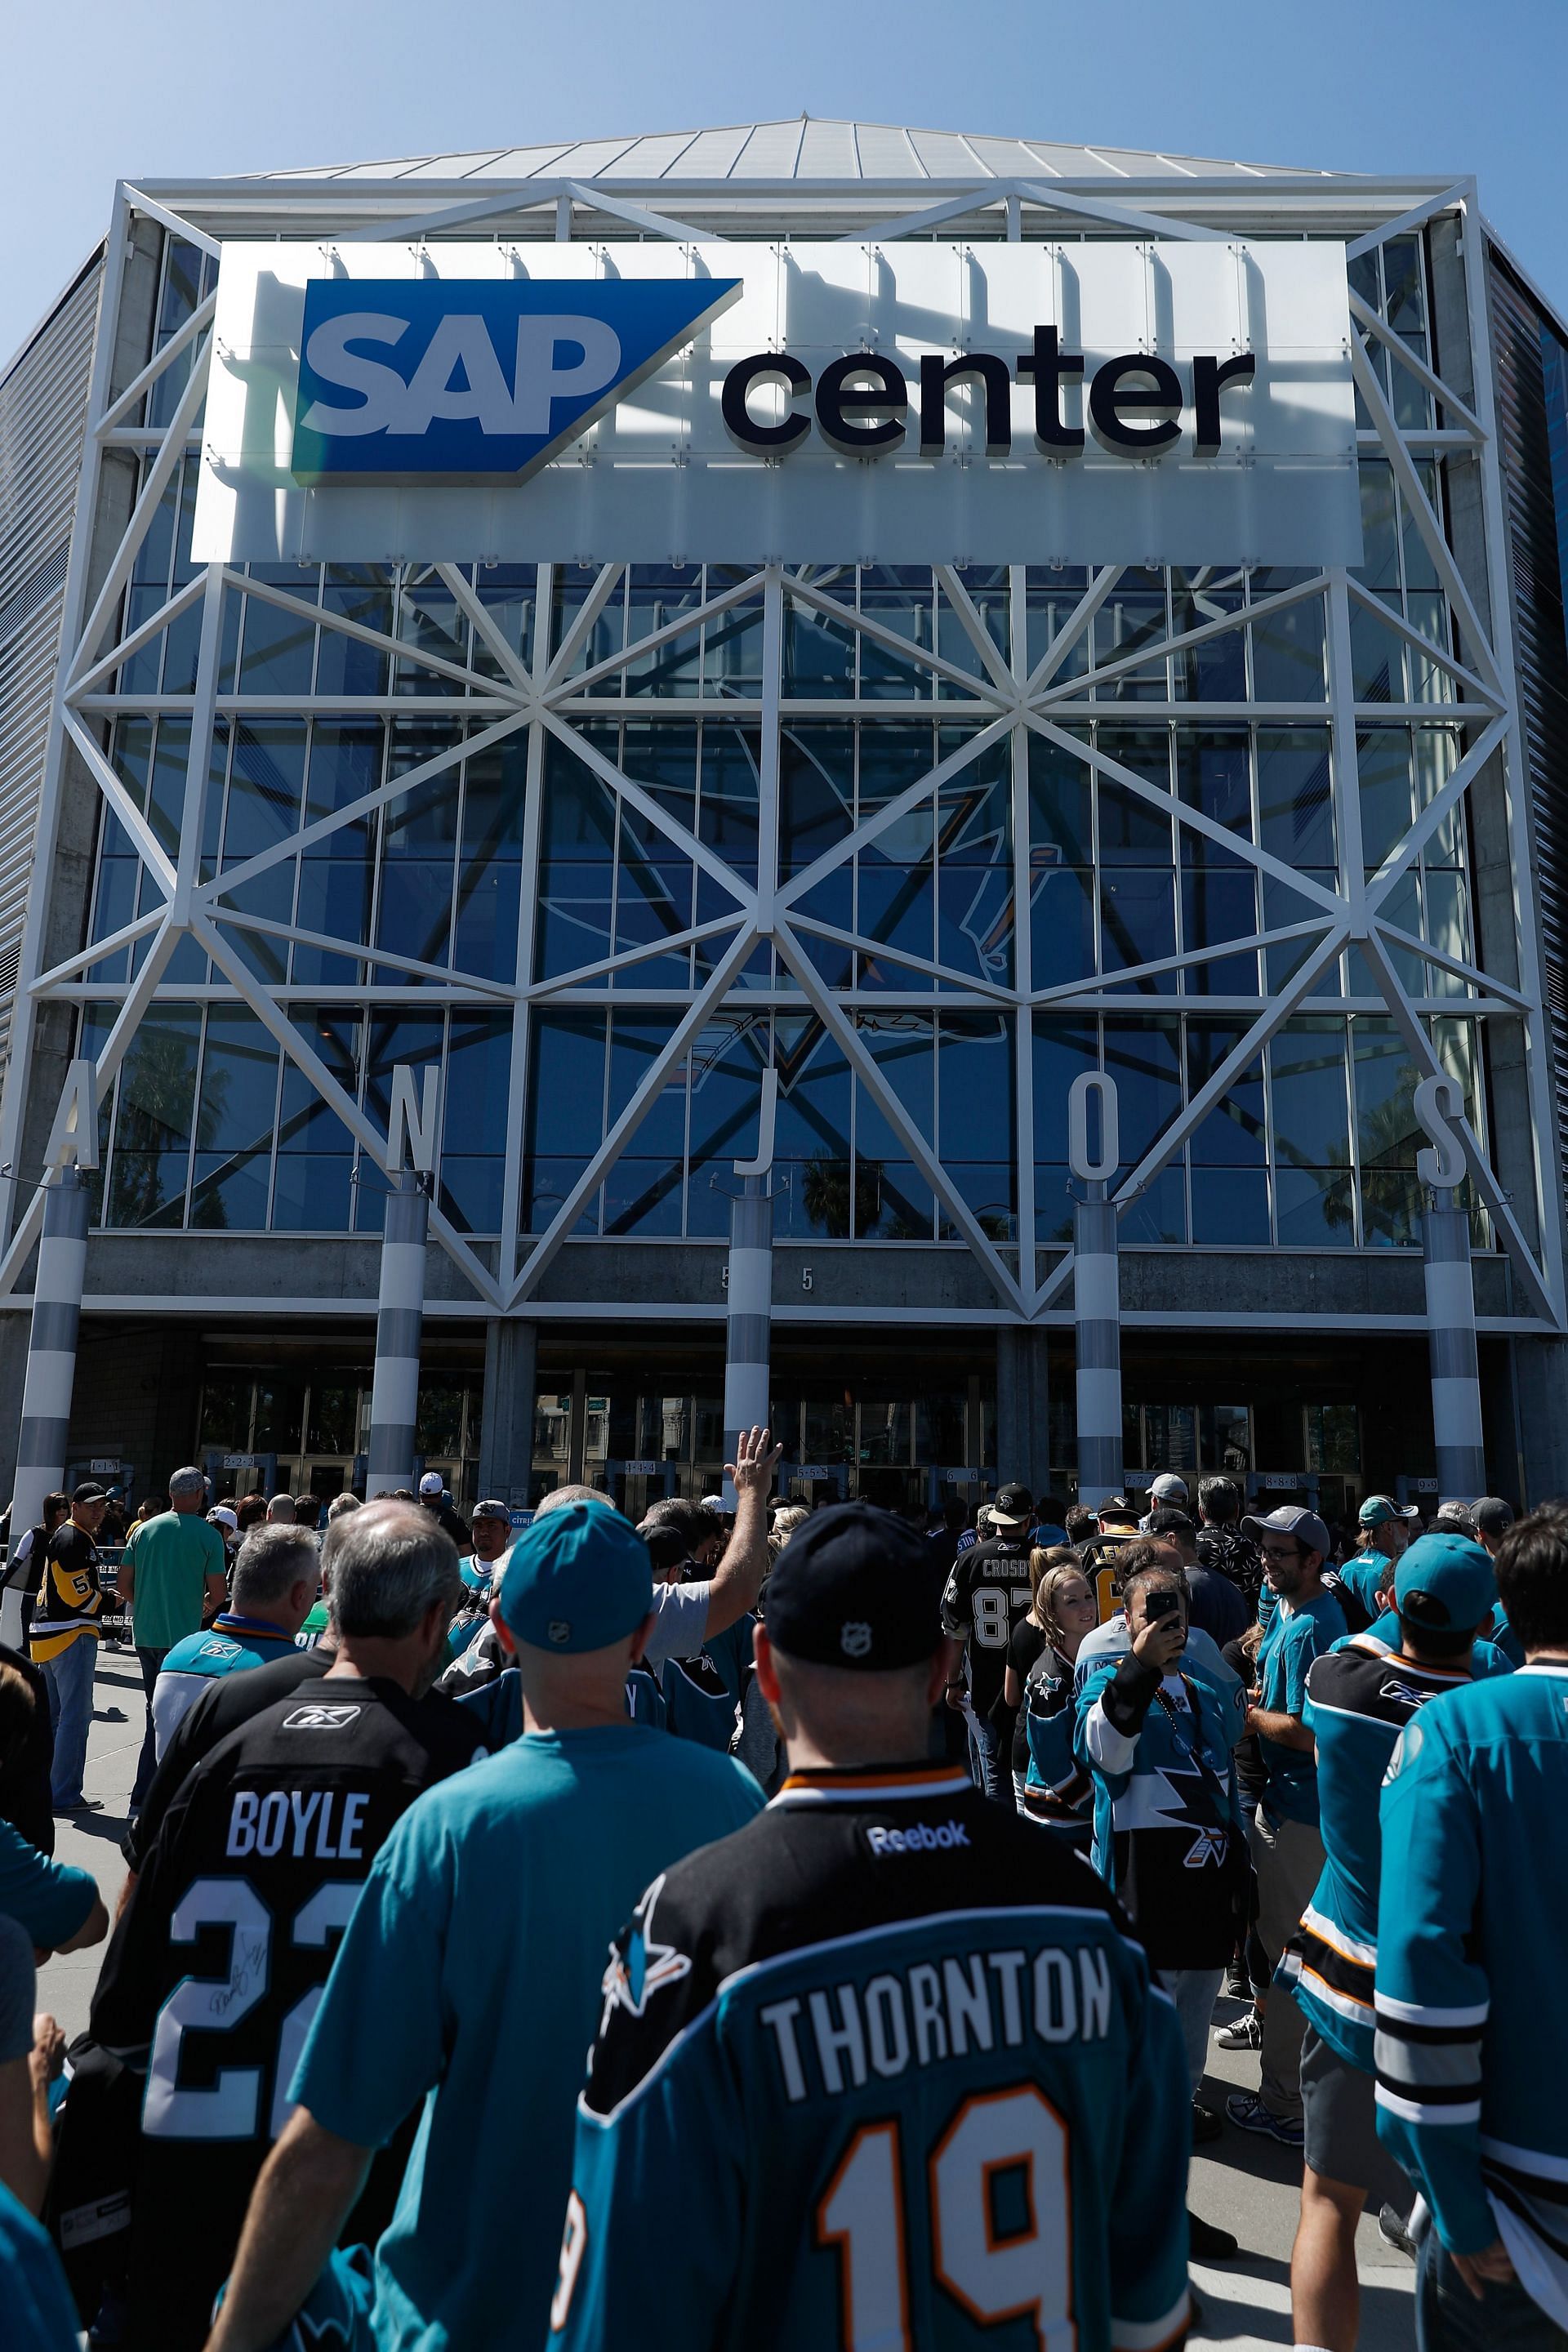 The SAP Center is one of the arenas that need renovations